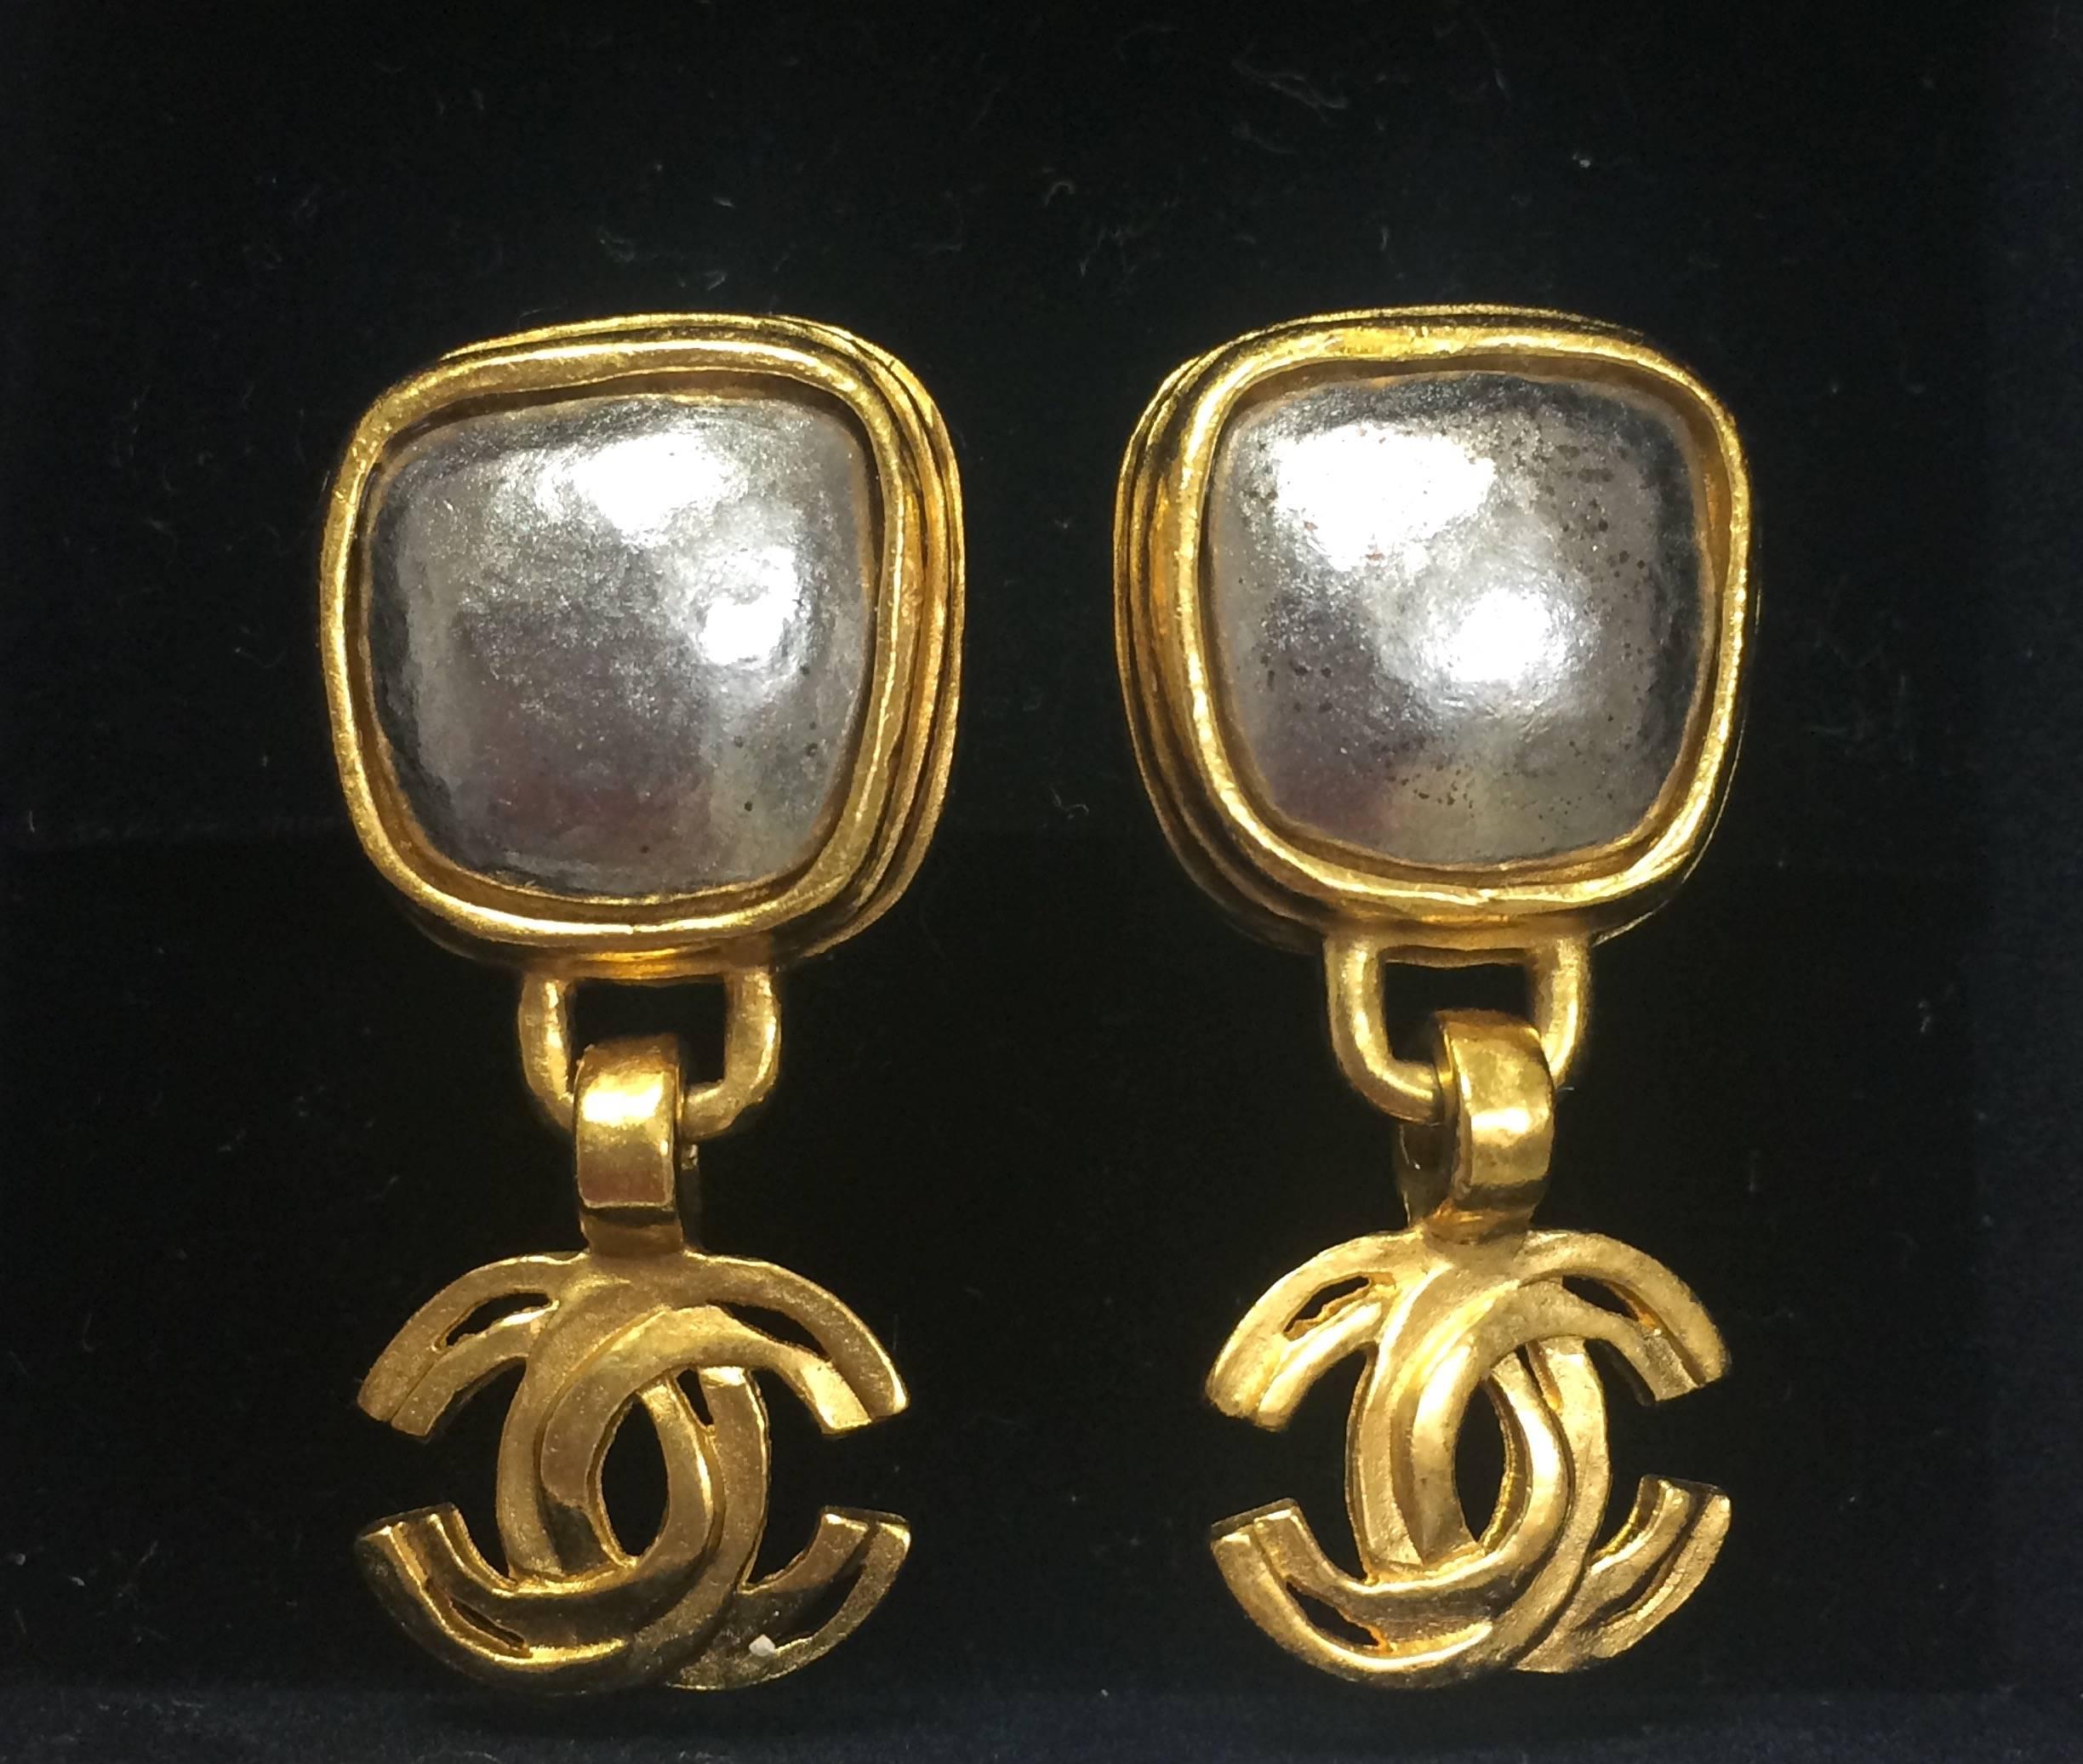 1990s. Vintage CHANEL dangling earrings with large CC mark and square silver tone gunmetal faux pearls. Rare, one-of-a-kind Chanel jewelry.

Introducing another rare vintage CHANEL jewelry, large cc mark dangling earrings with square gunmetal color